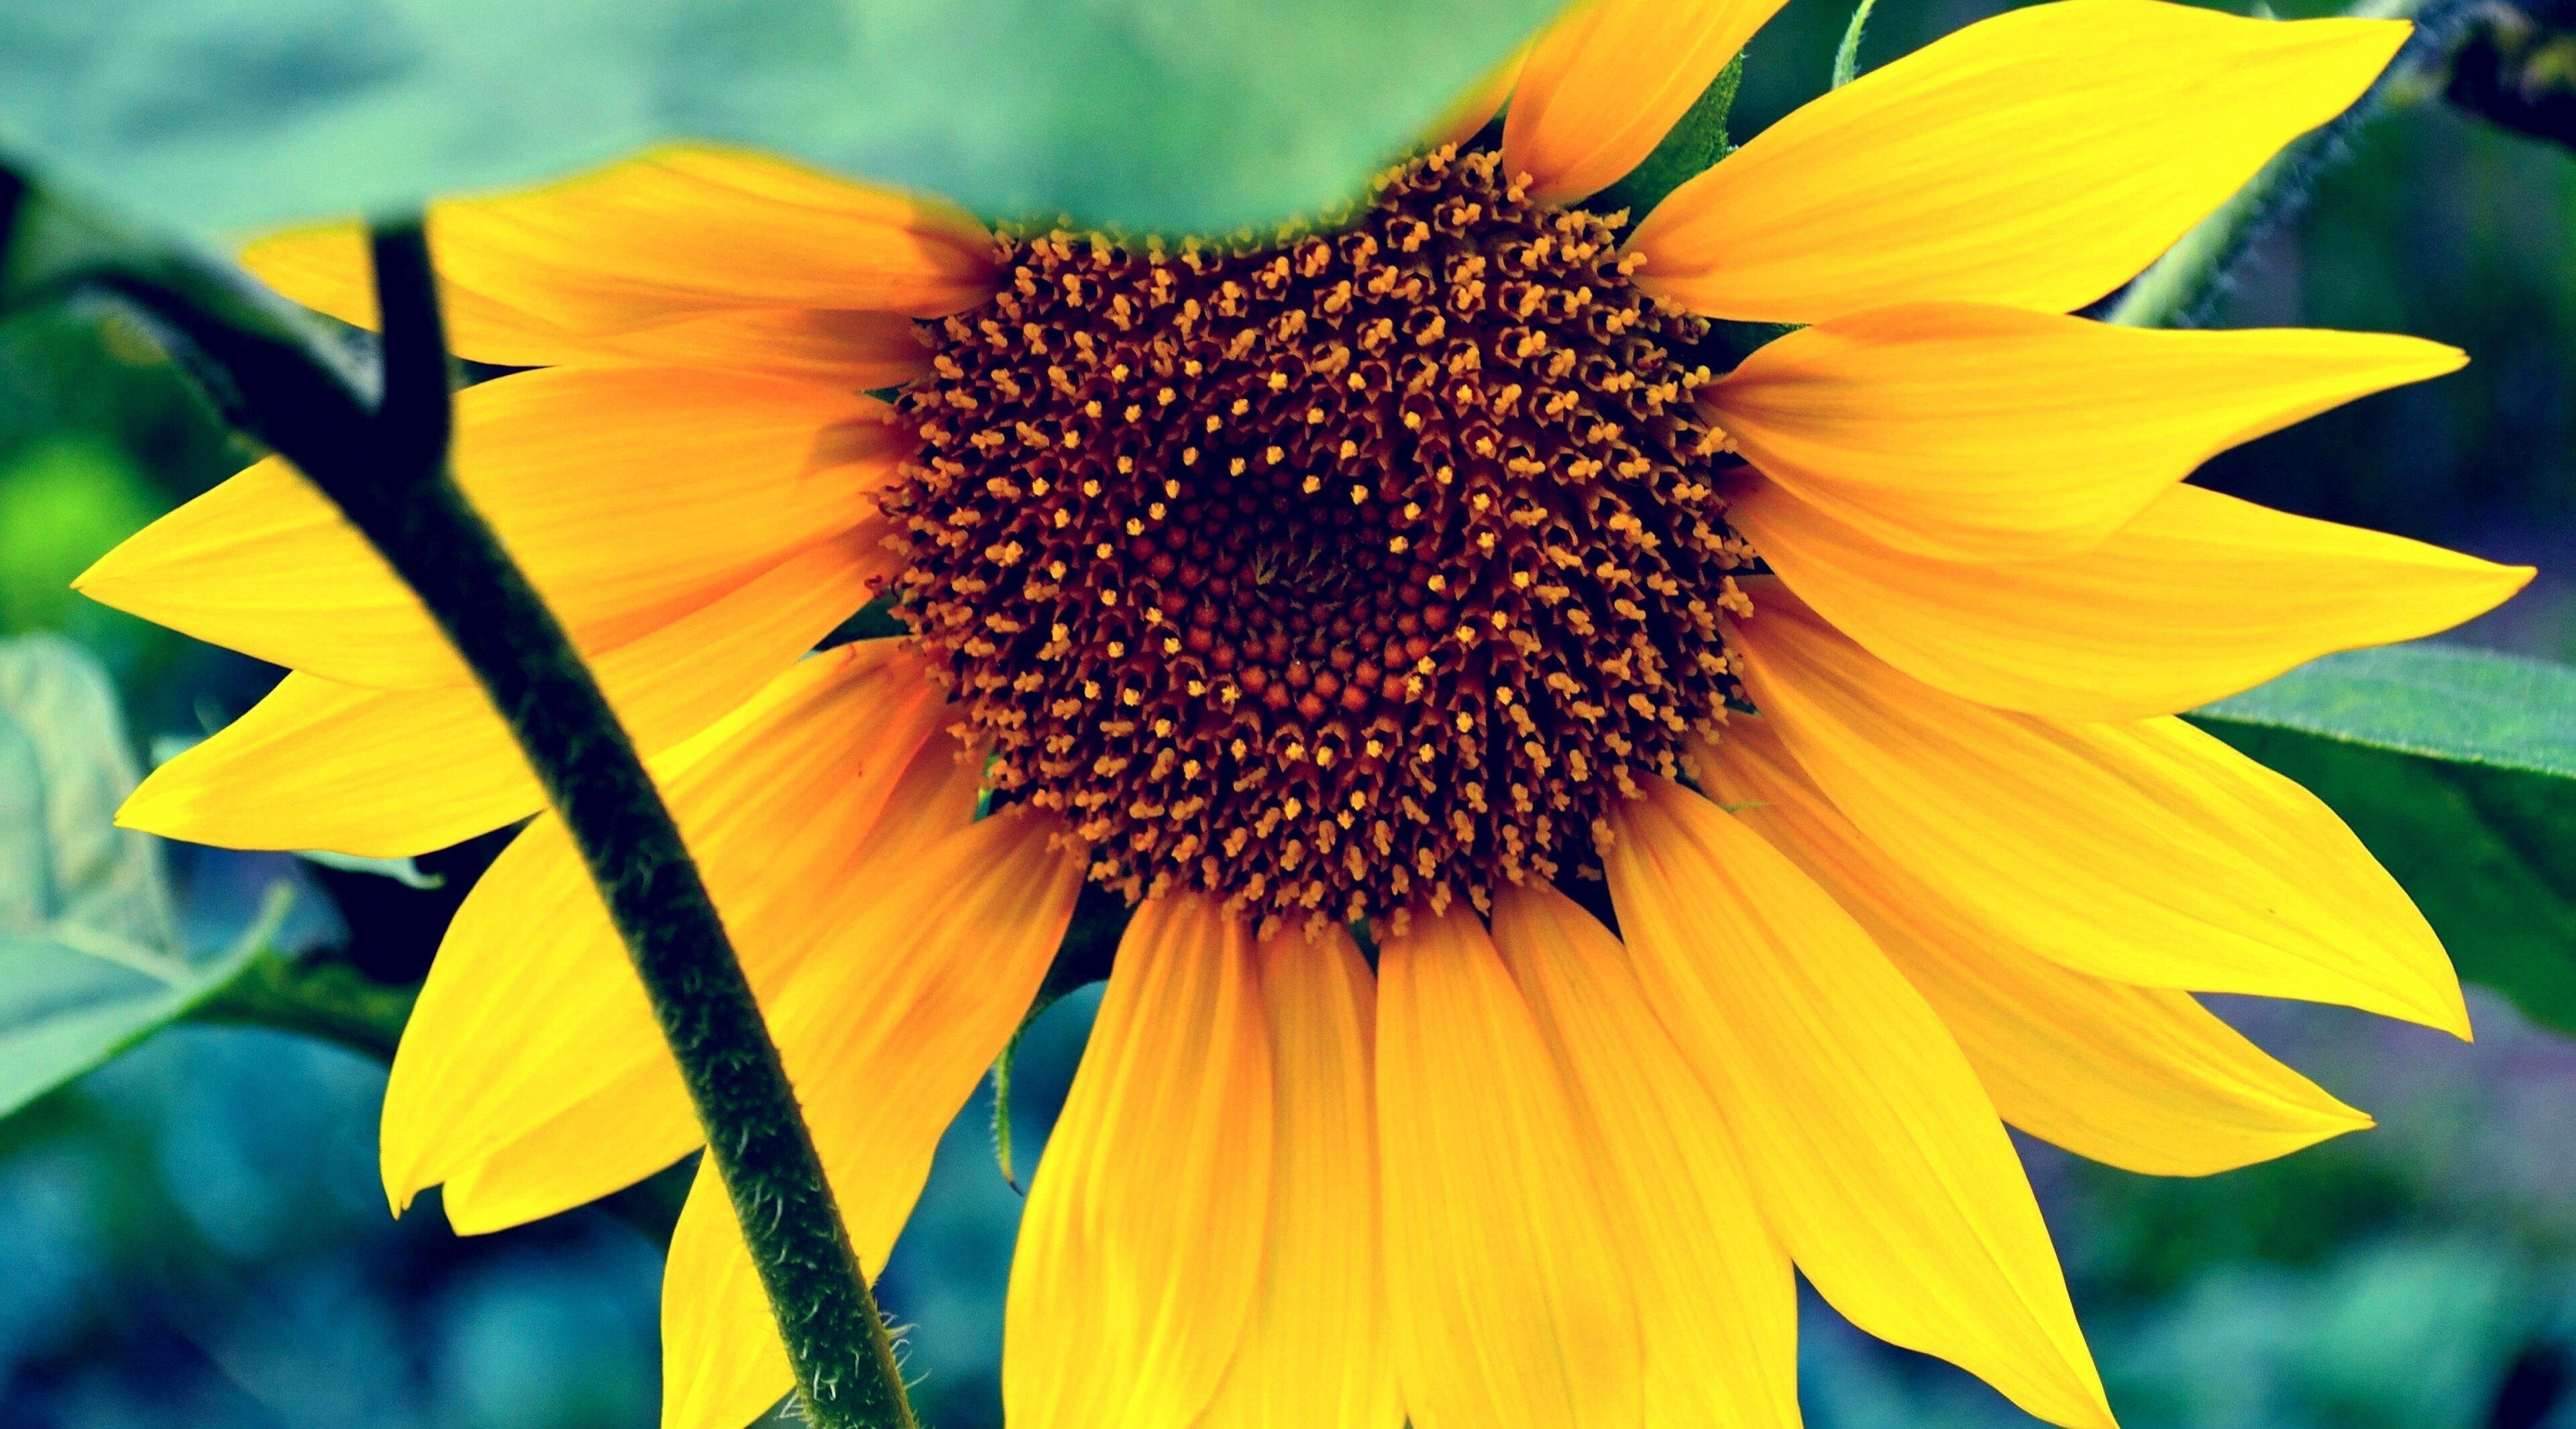 sunflower 4k cool background picture. Cool background